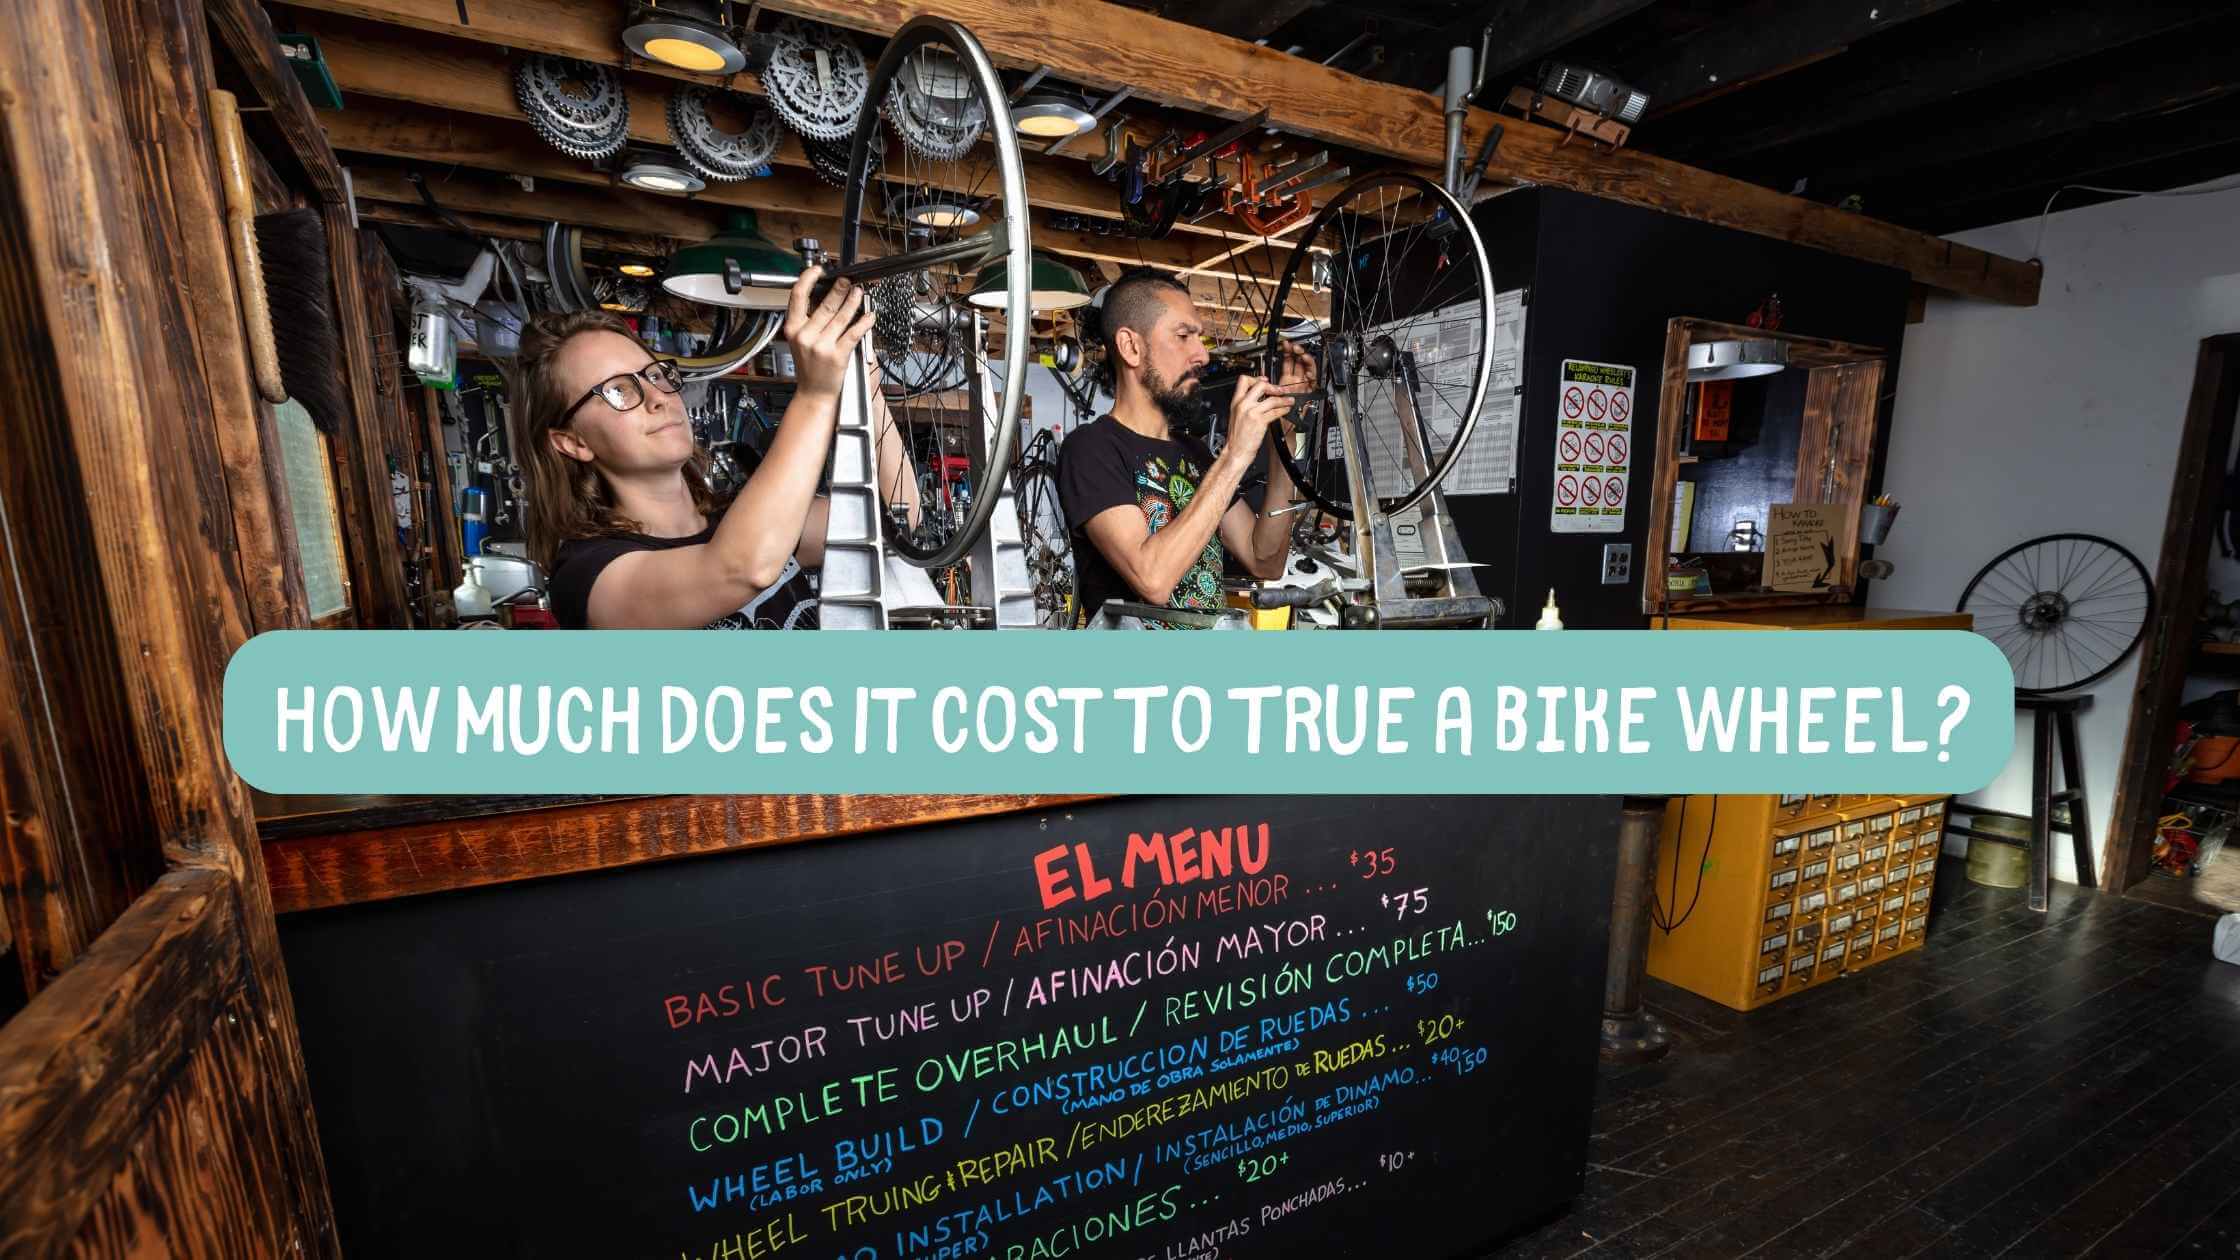 How Much Does It Cost To True a Bike Wheel